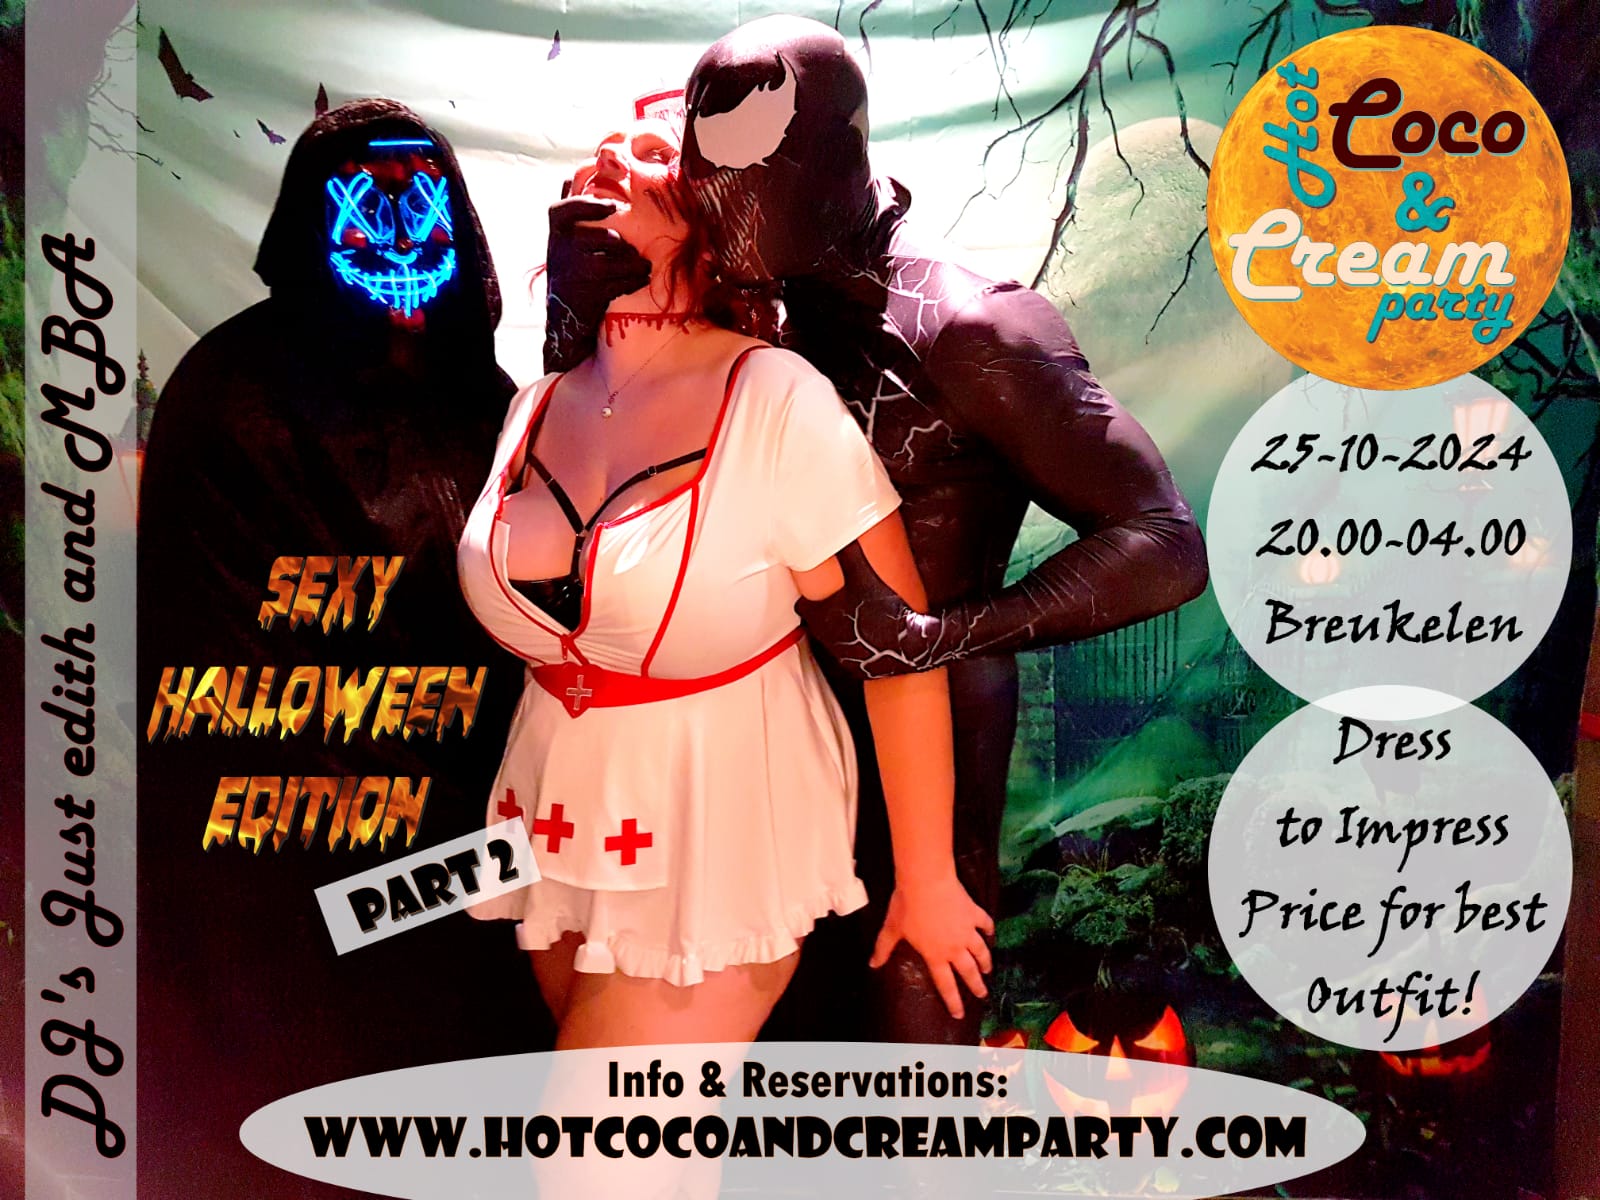 Hot Coco and Cream party presents:  "Dirty Halloween Edition part 2".